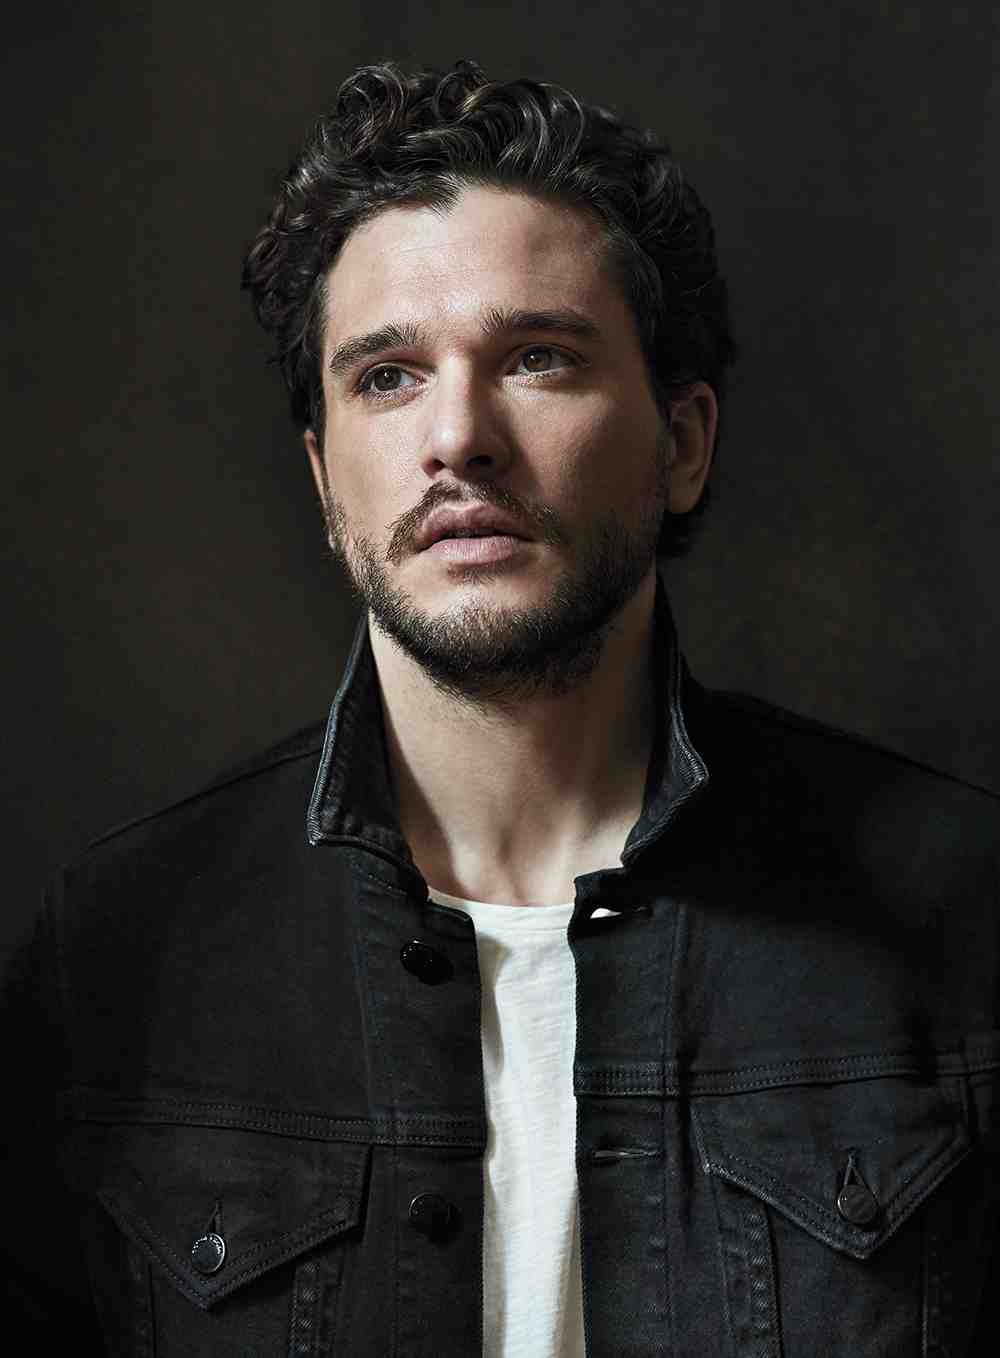 Uncover how Kit Harington's movie and TV shows swayed him towards rehab. Brace yourself - the off-screen story might be darker than Winterfell's long winters. Click to explore.